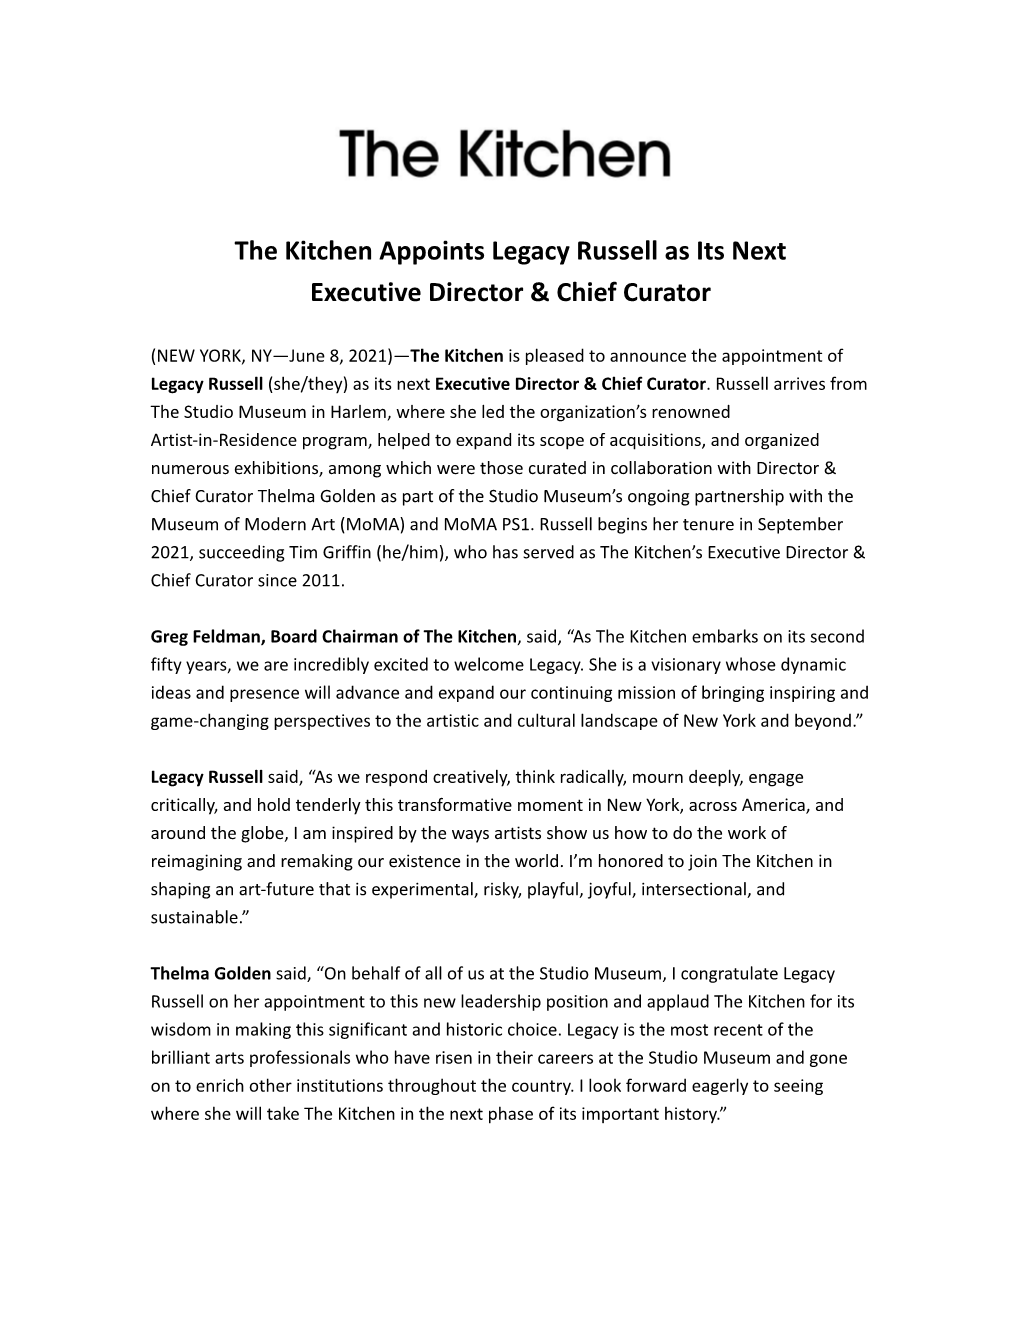 The Kitchen Appoints Legacy Russell As Its Next Executive Director & Chief Curator